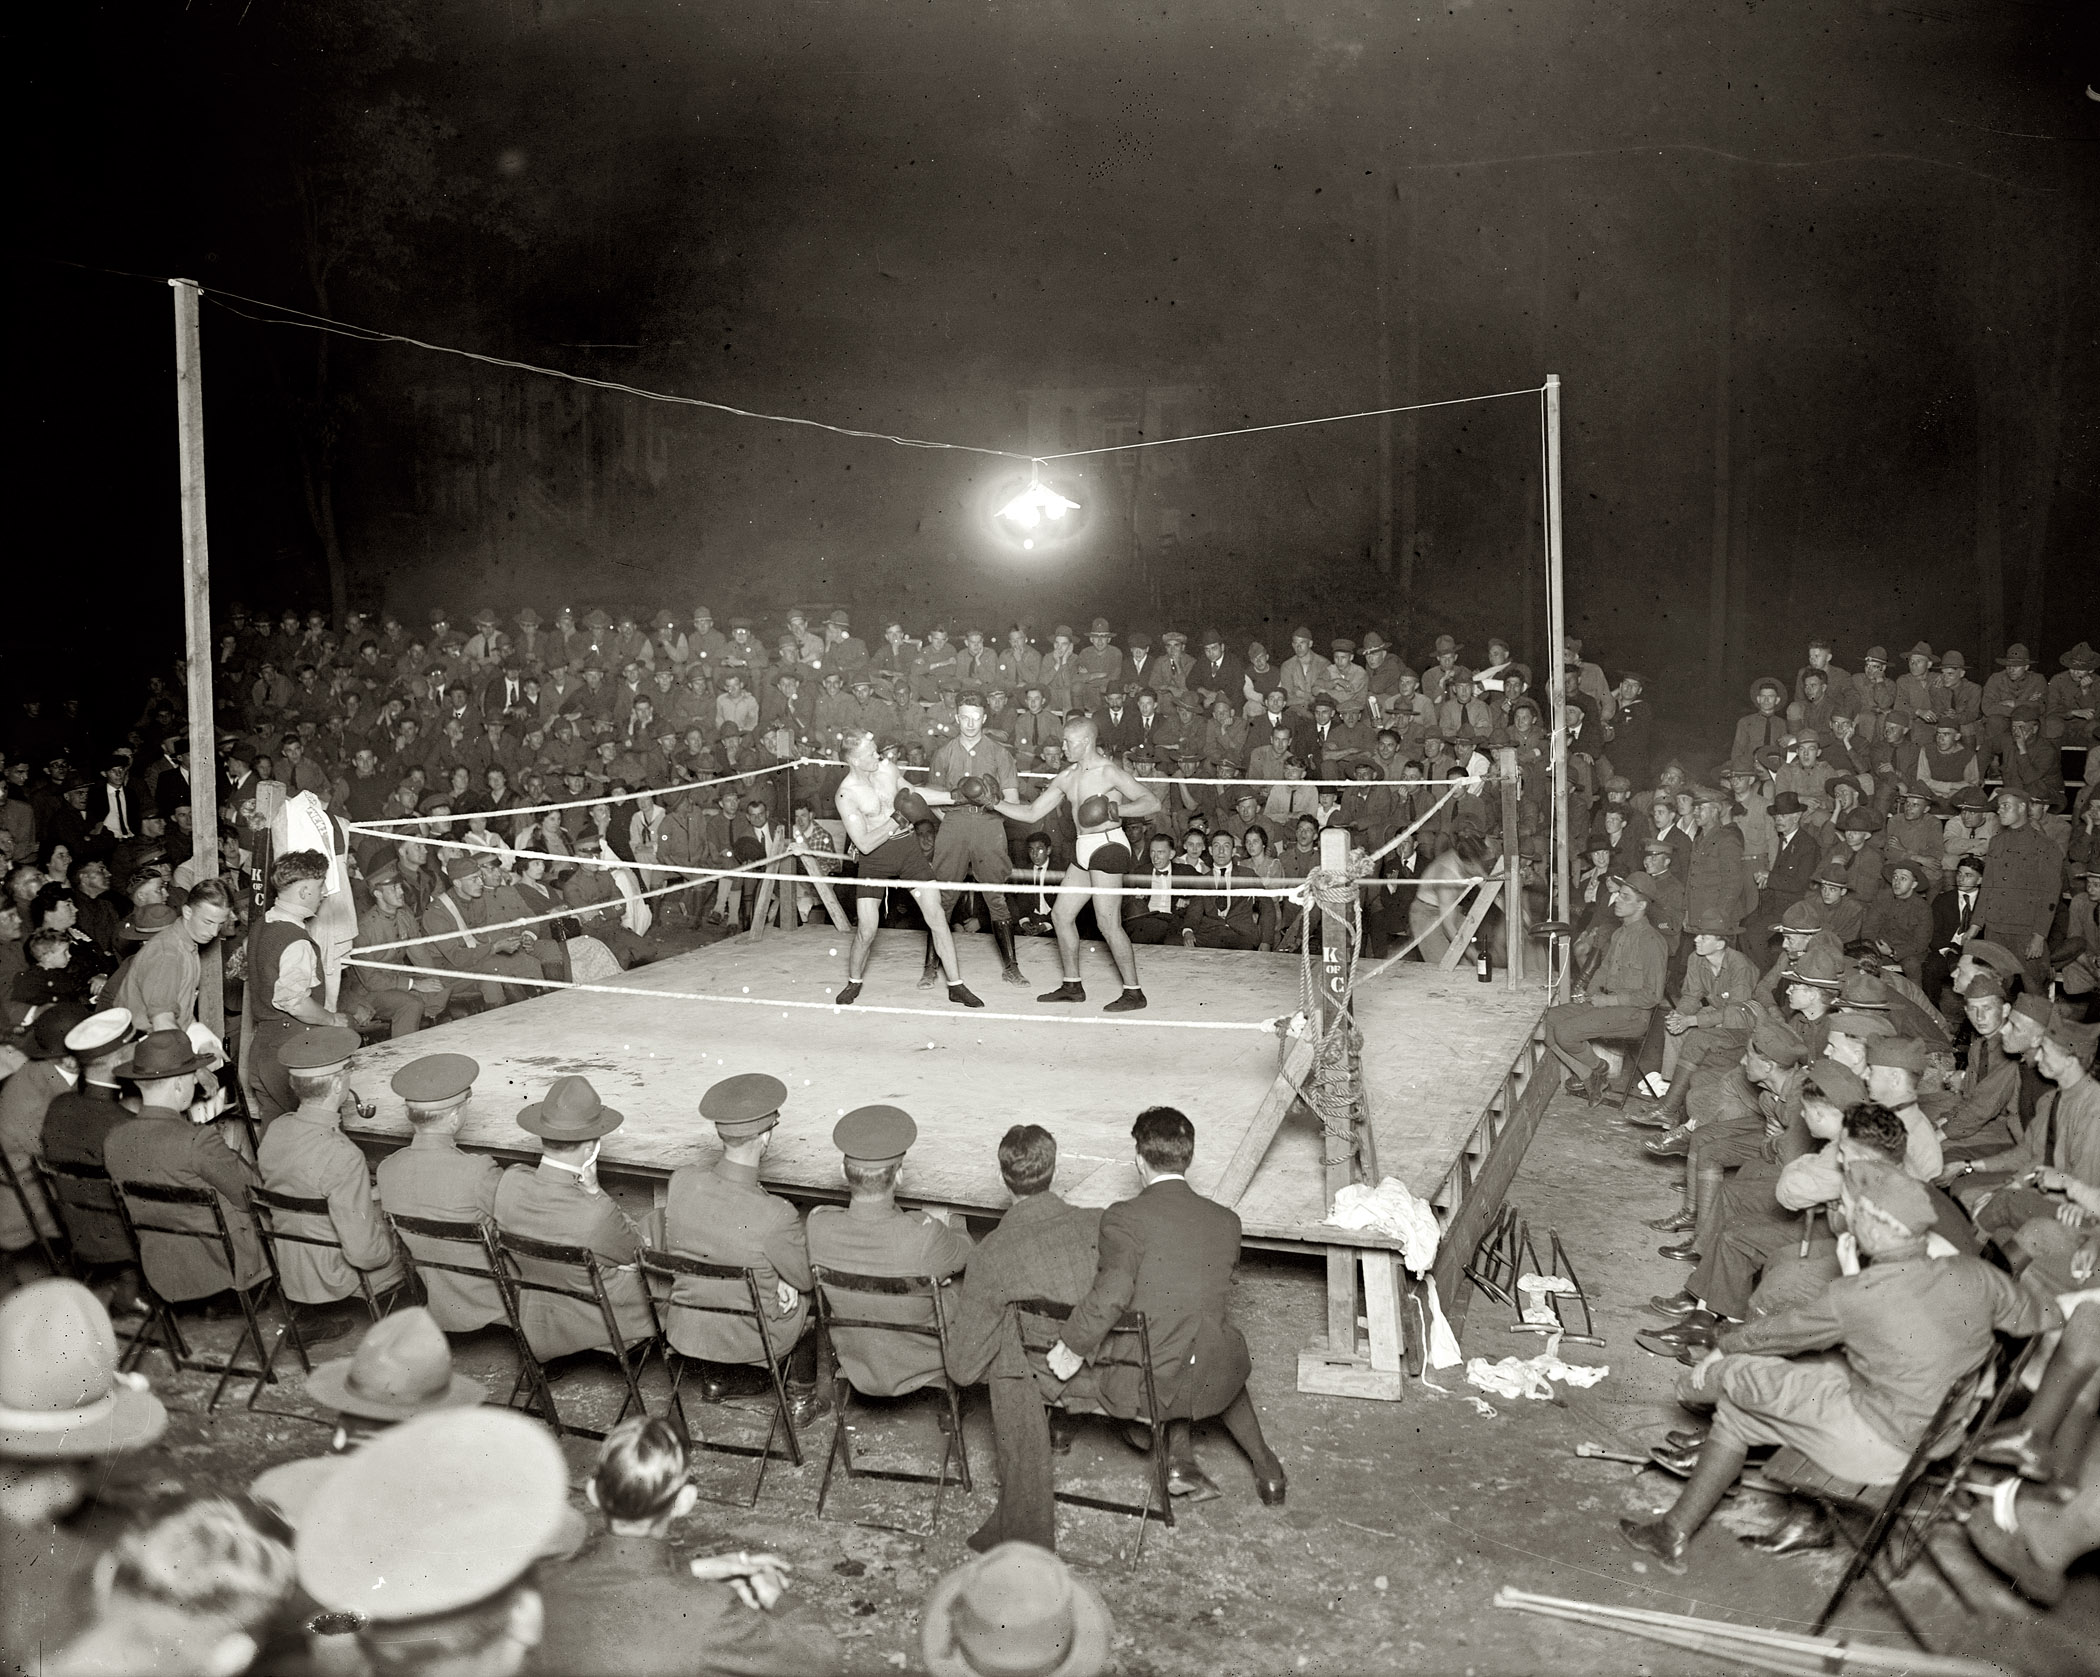 Circa 1919, "Boxing at Walter Reed Hospital." With some connection to the Knights of Columbus. View full size. National Photo Company glass negative.